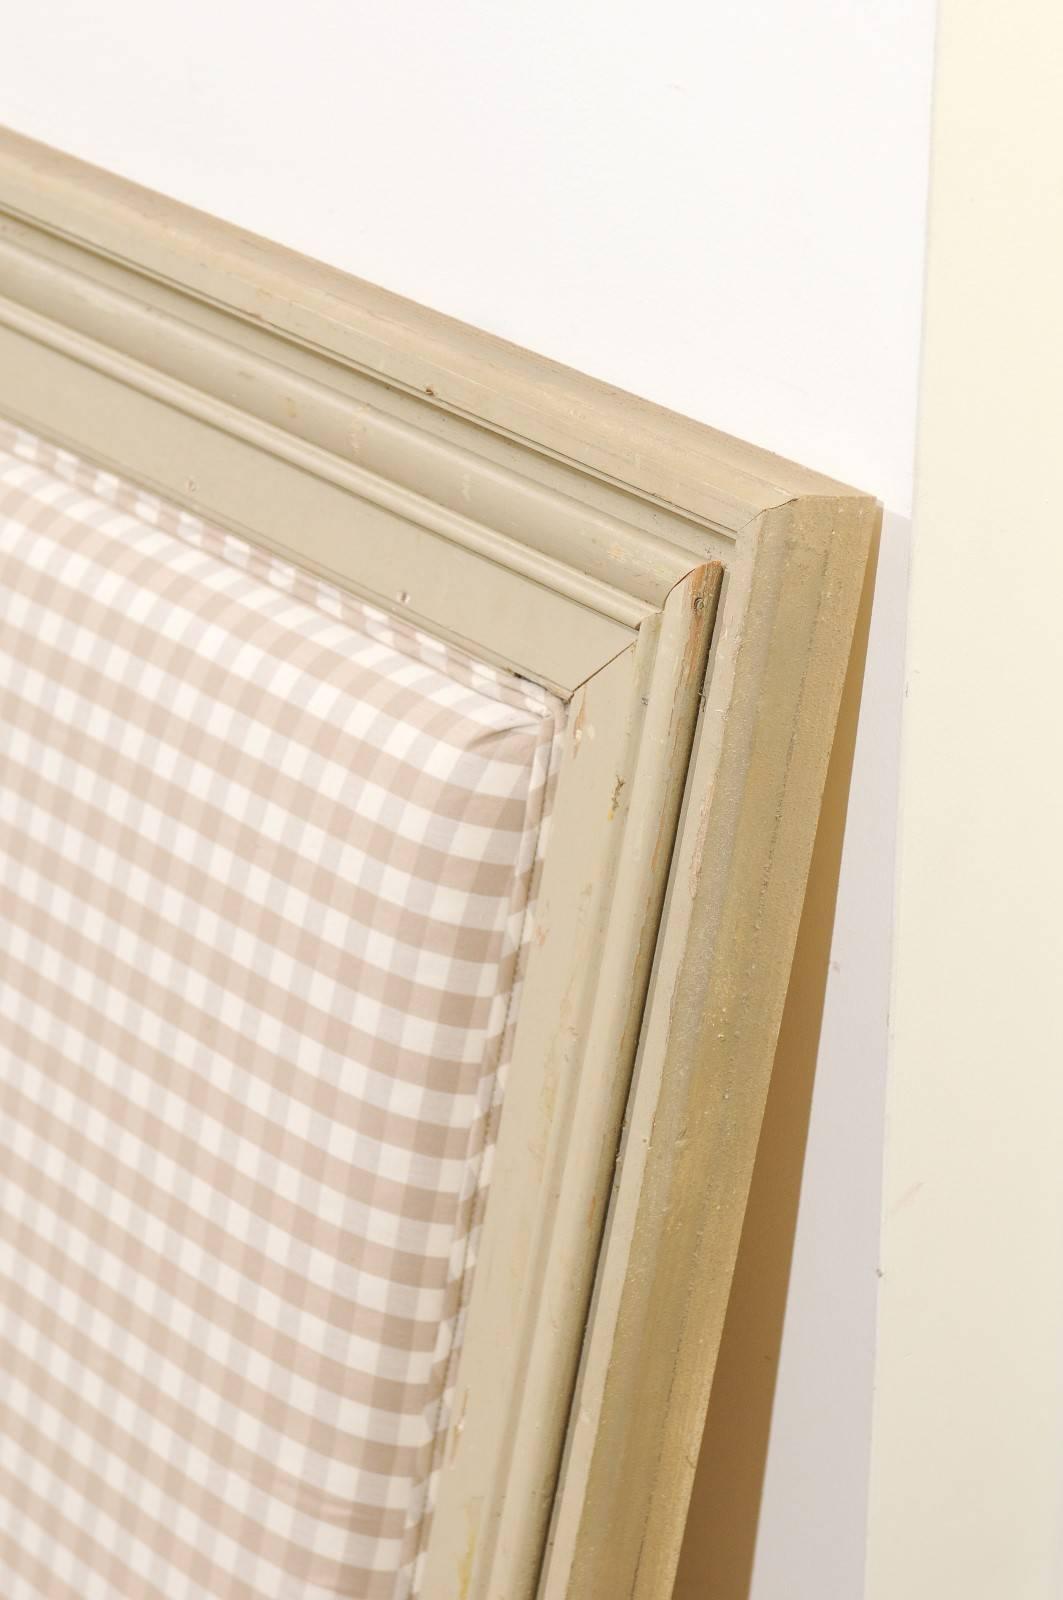 Contemporary King-Size Wood and Plaid Fabric Headboard Made of Antique French Door Molding